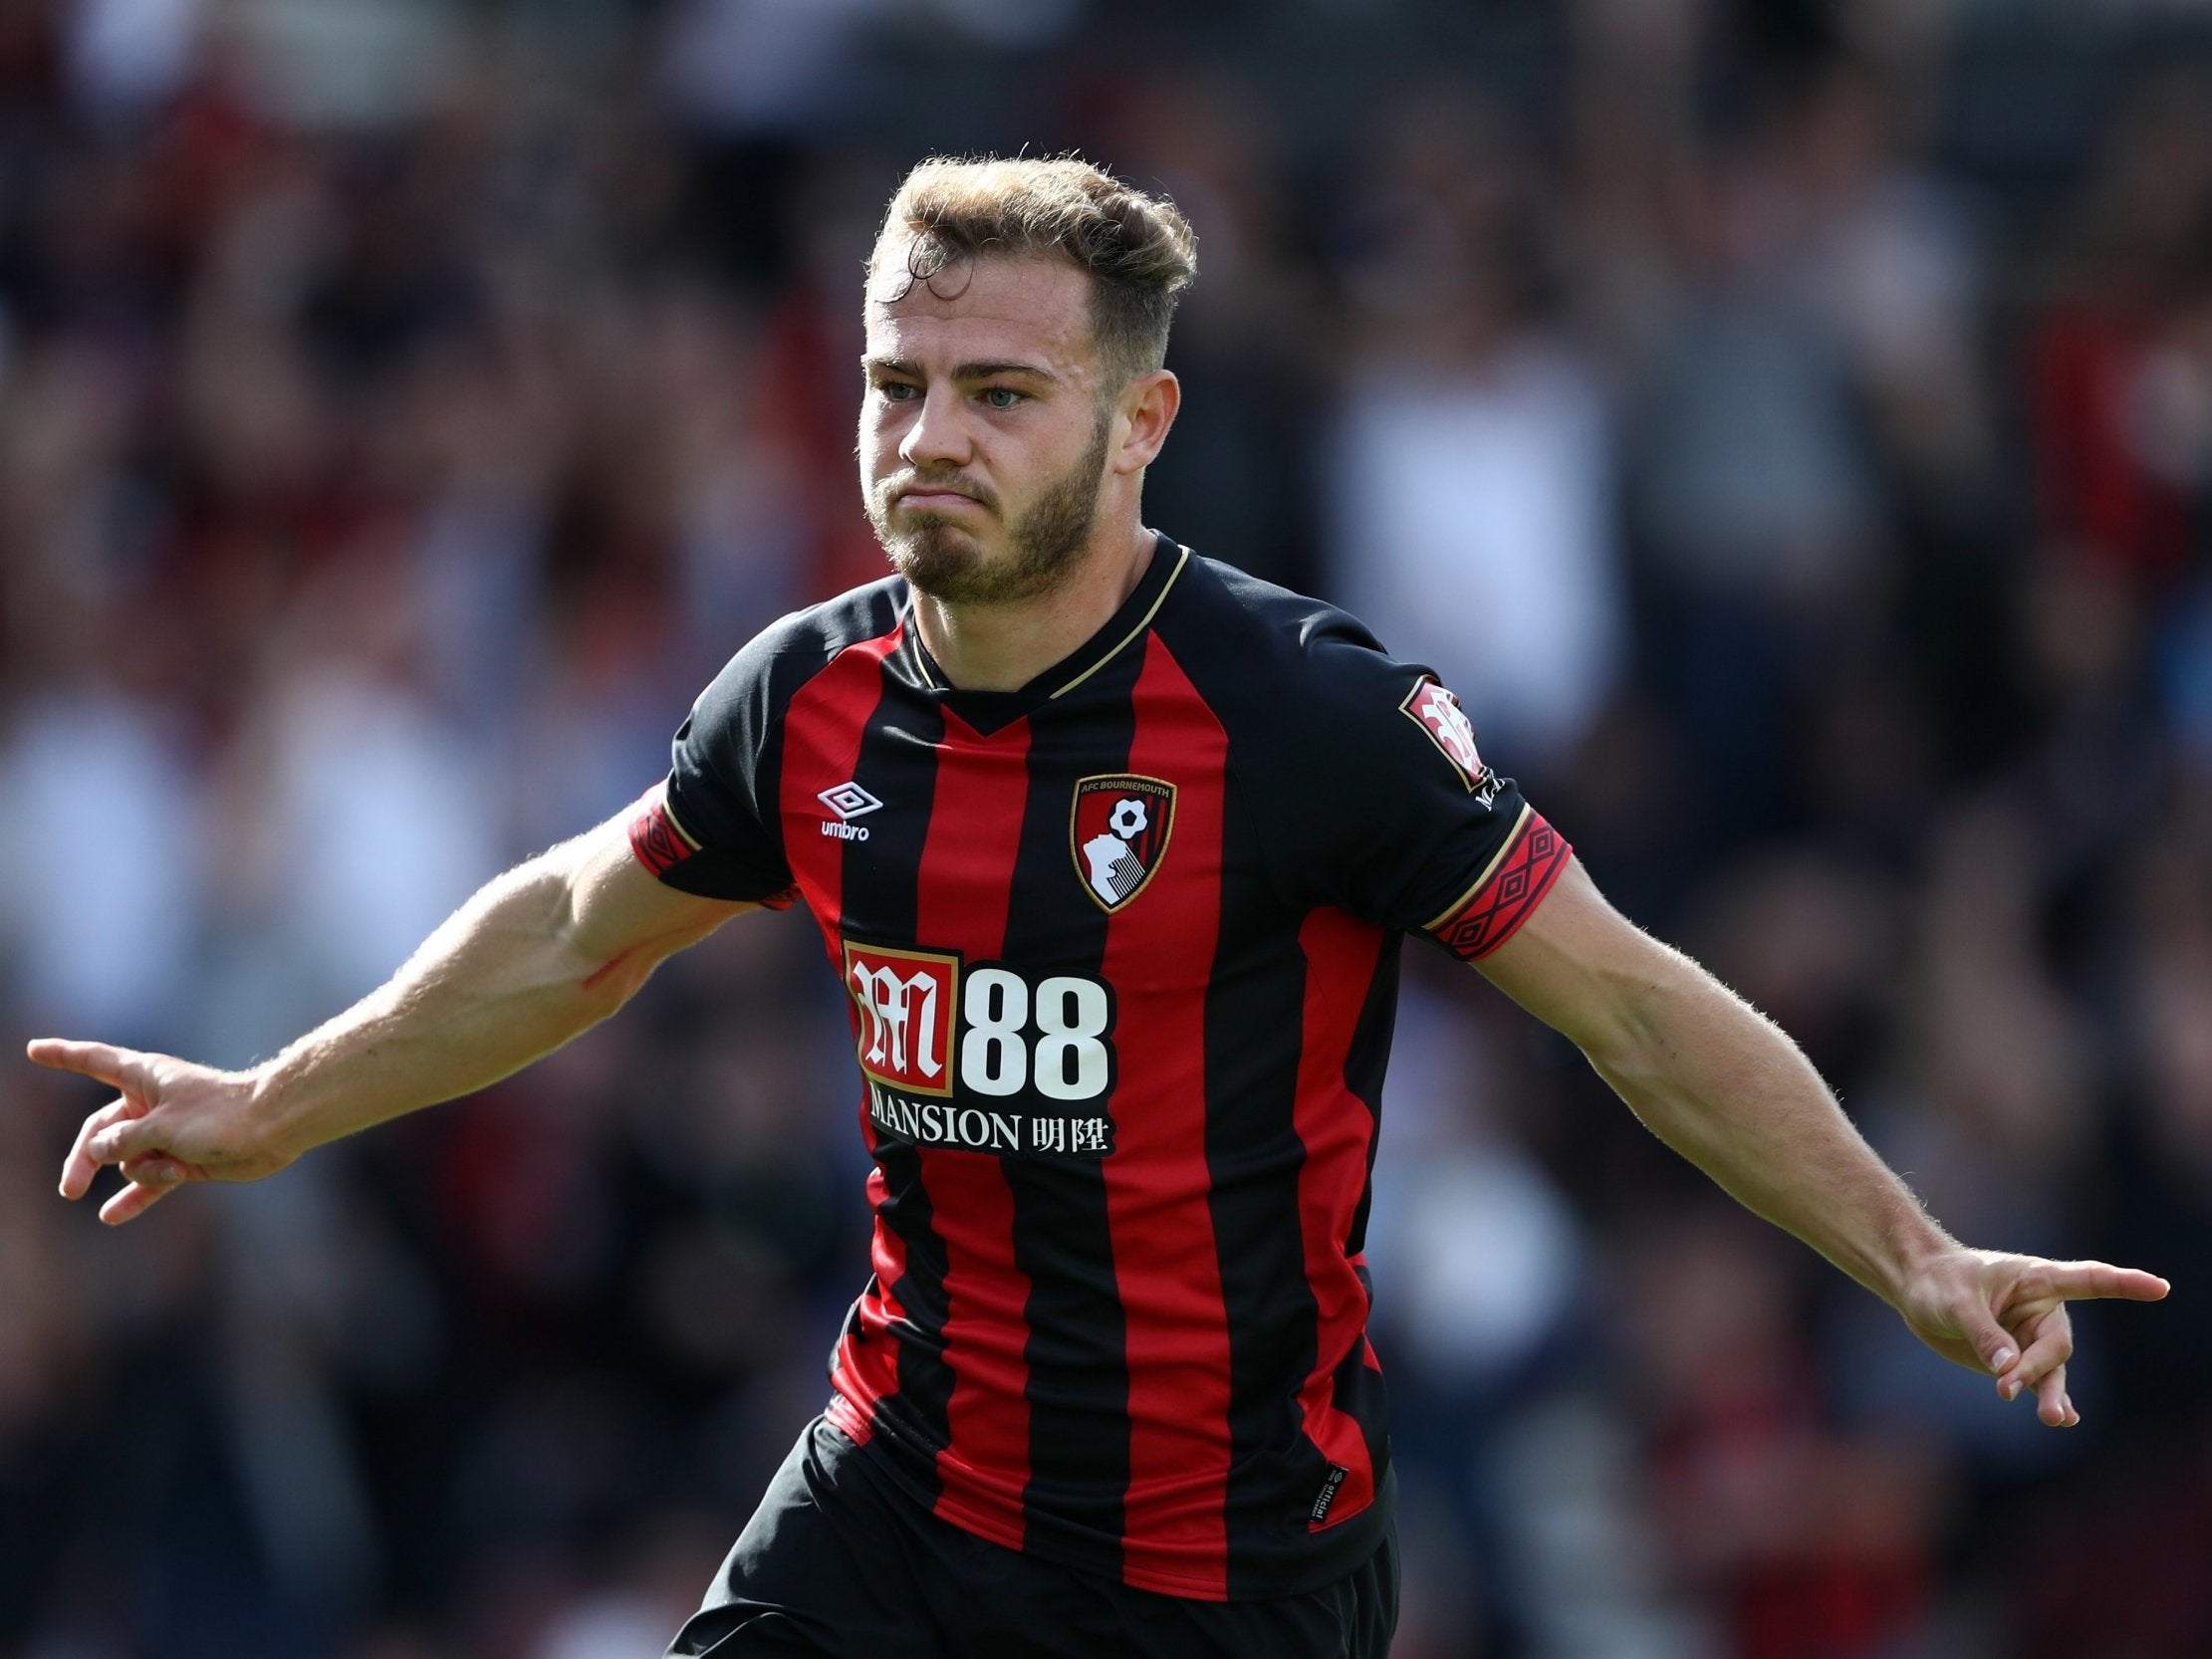 Ryan Fraser celebrates after scoring his second goal for Bournemouth against Leicester